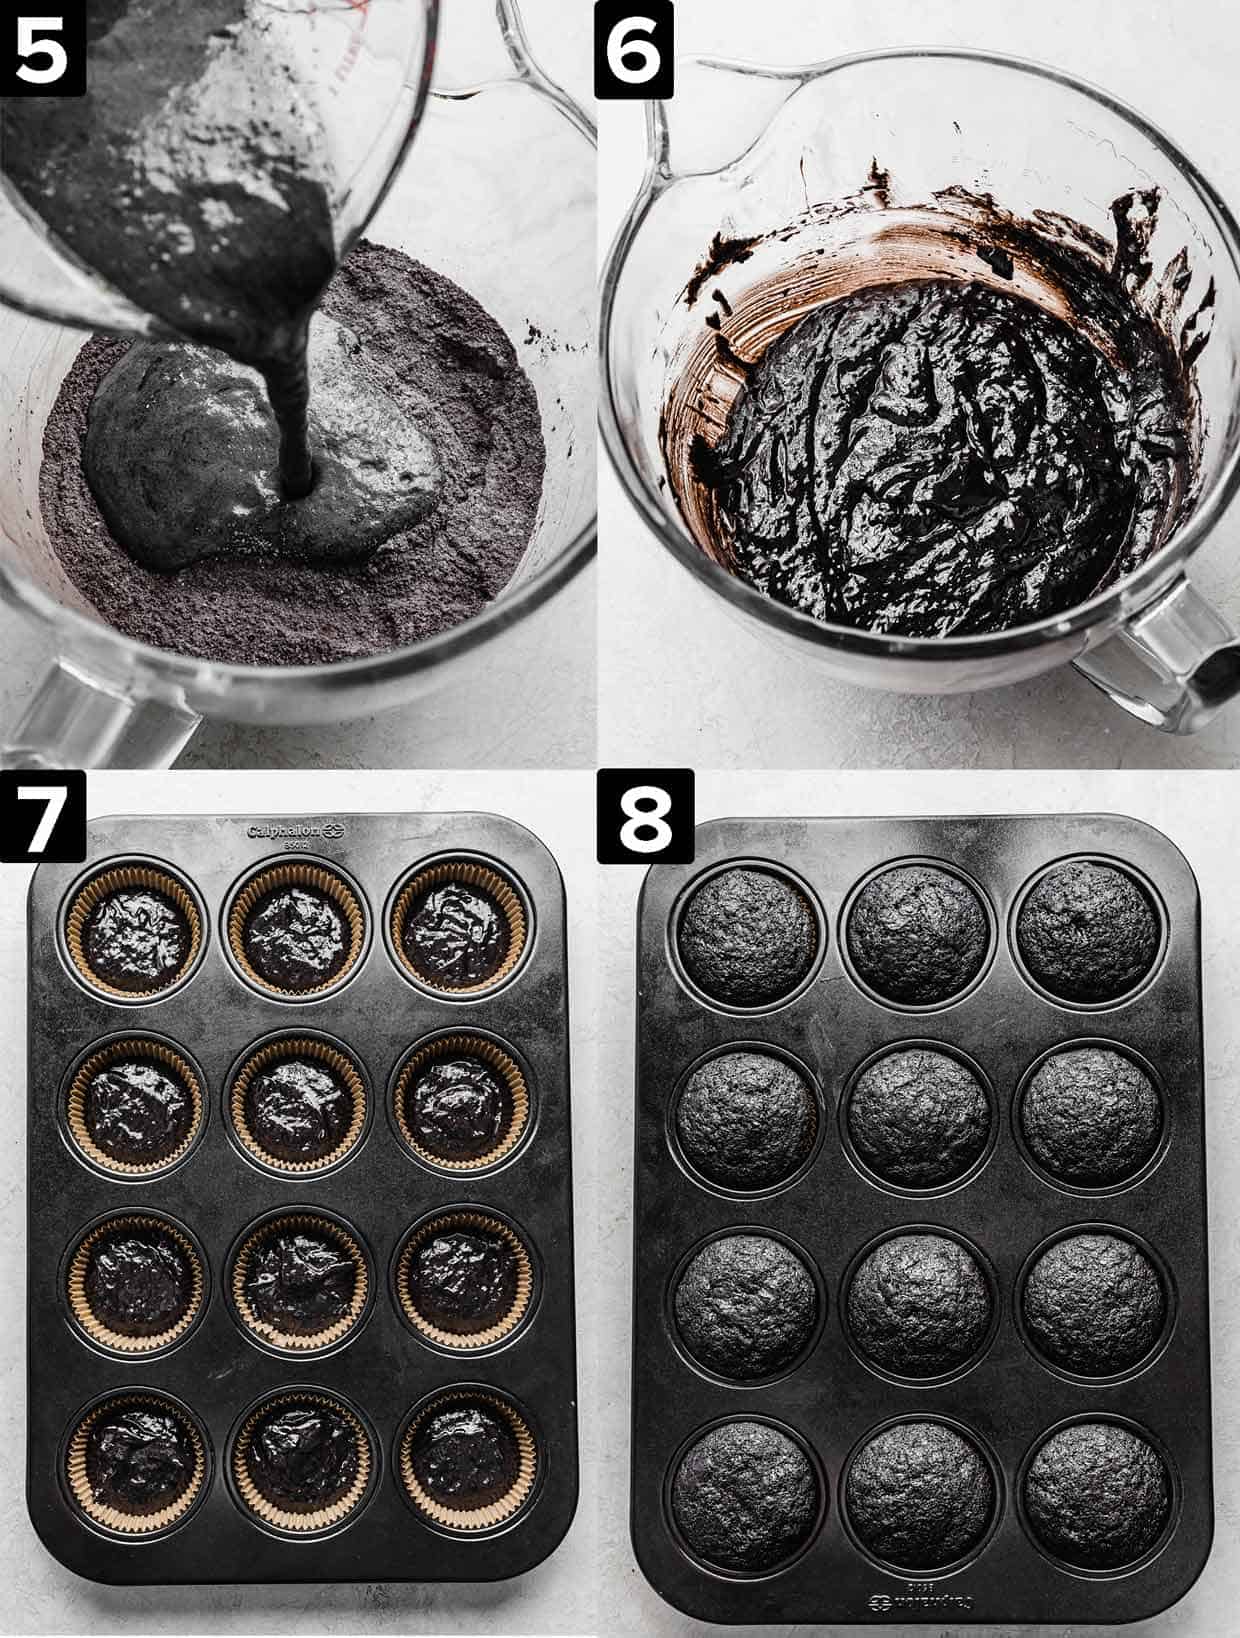 Four images top left to bottom right: black cocoa cupcake batter in a glass bowl, black cupcake batter in glass bowl, cupcake tin with cupcake batter in each compartment, baked black velvet cupcakes in muffin tin.